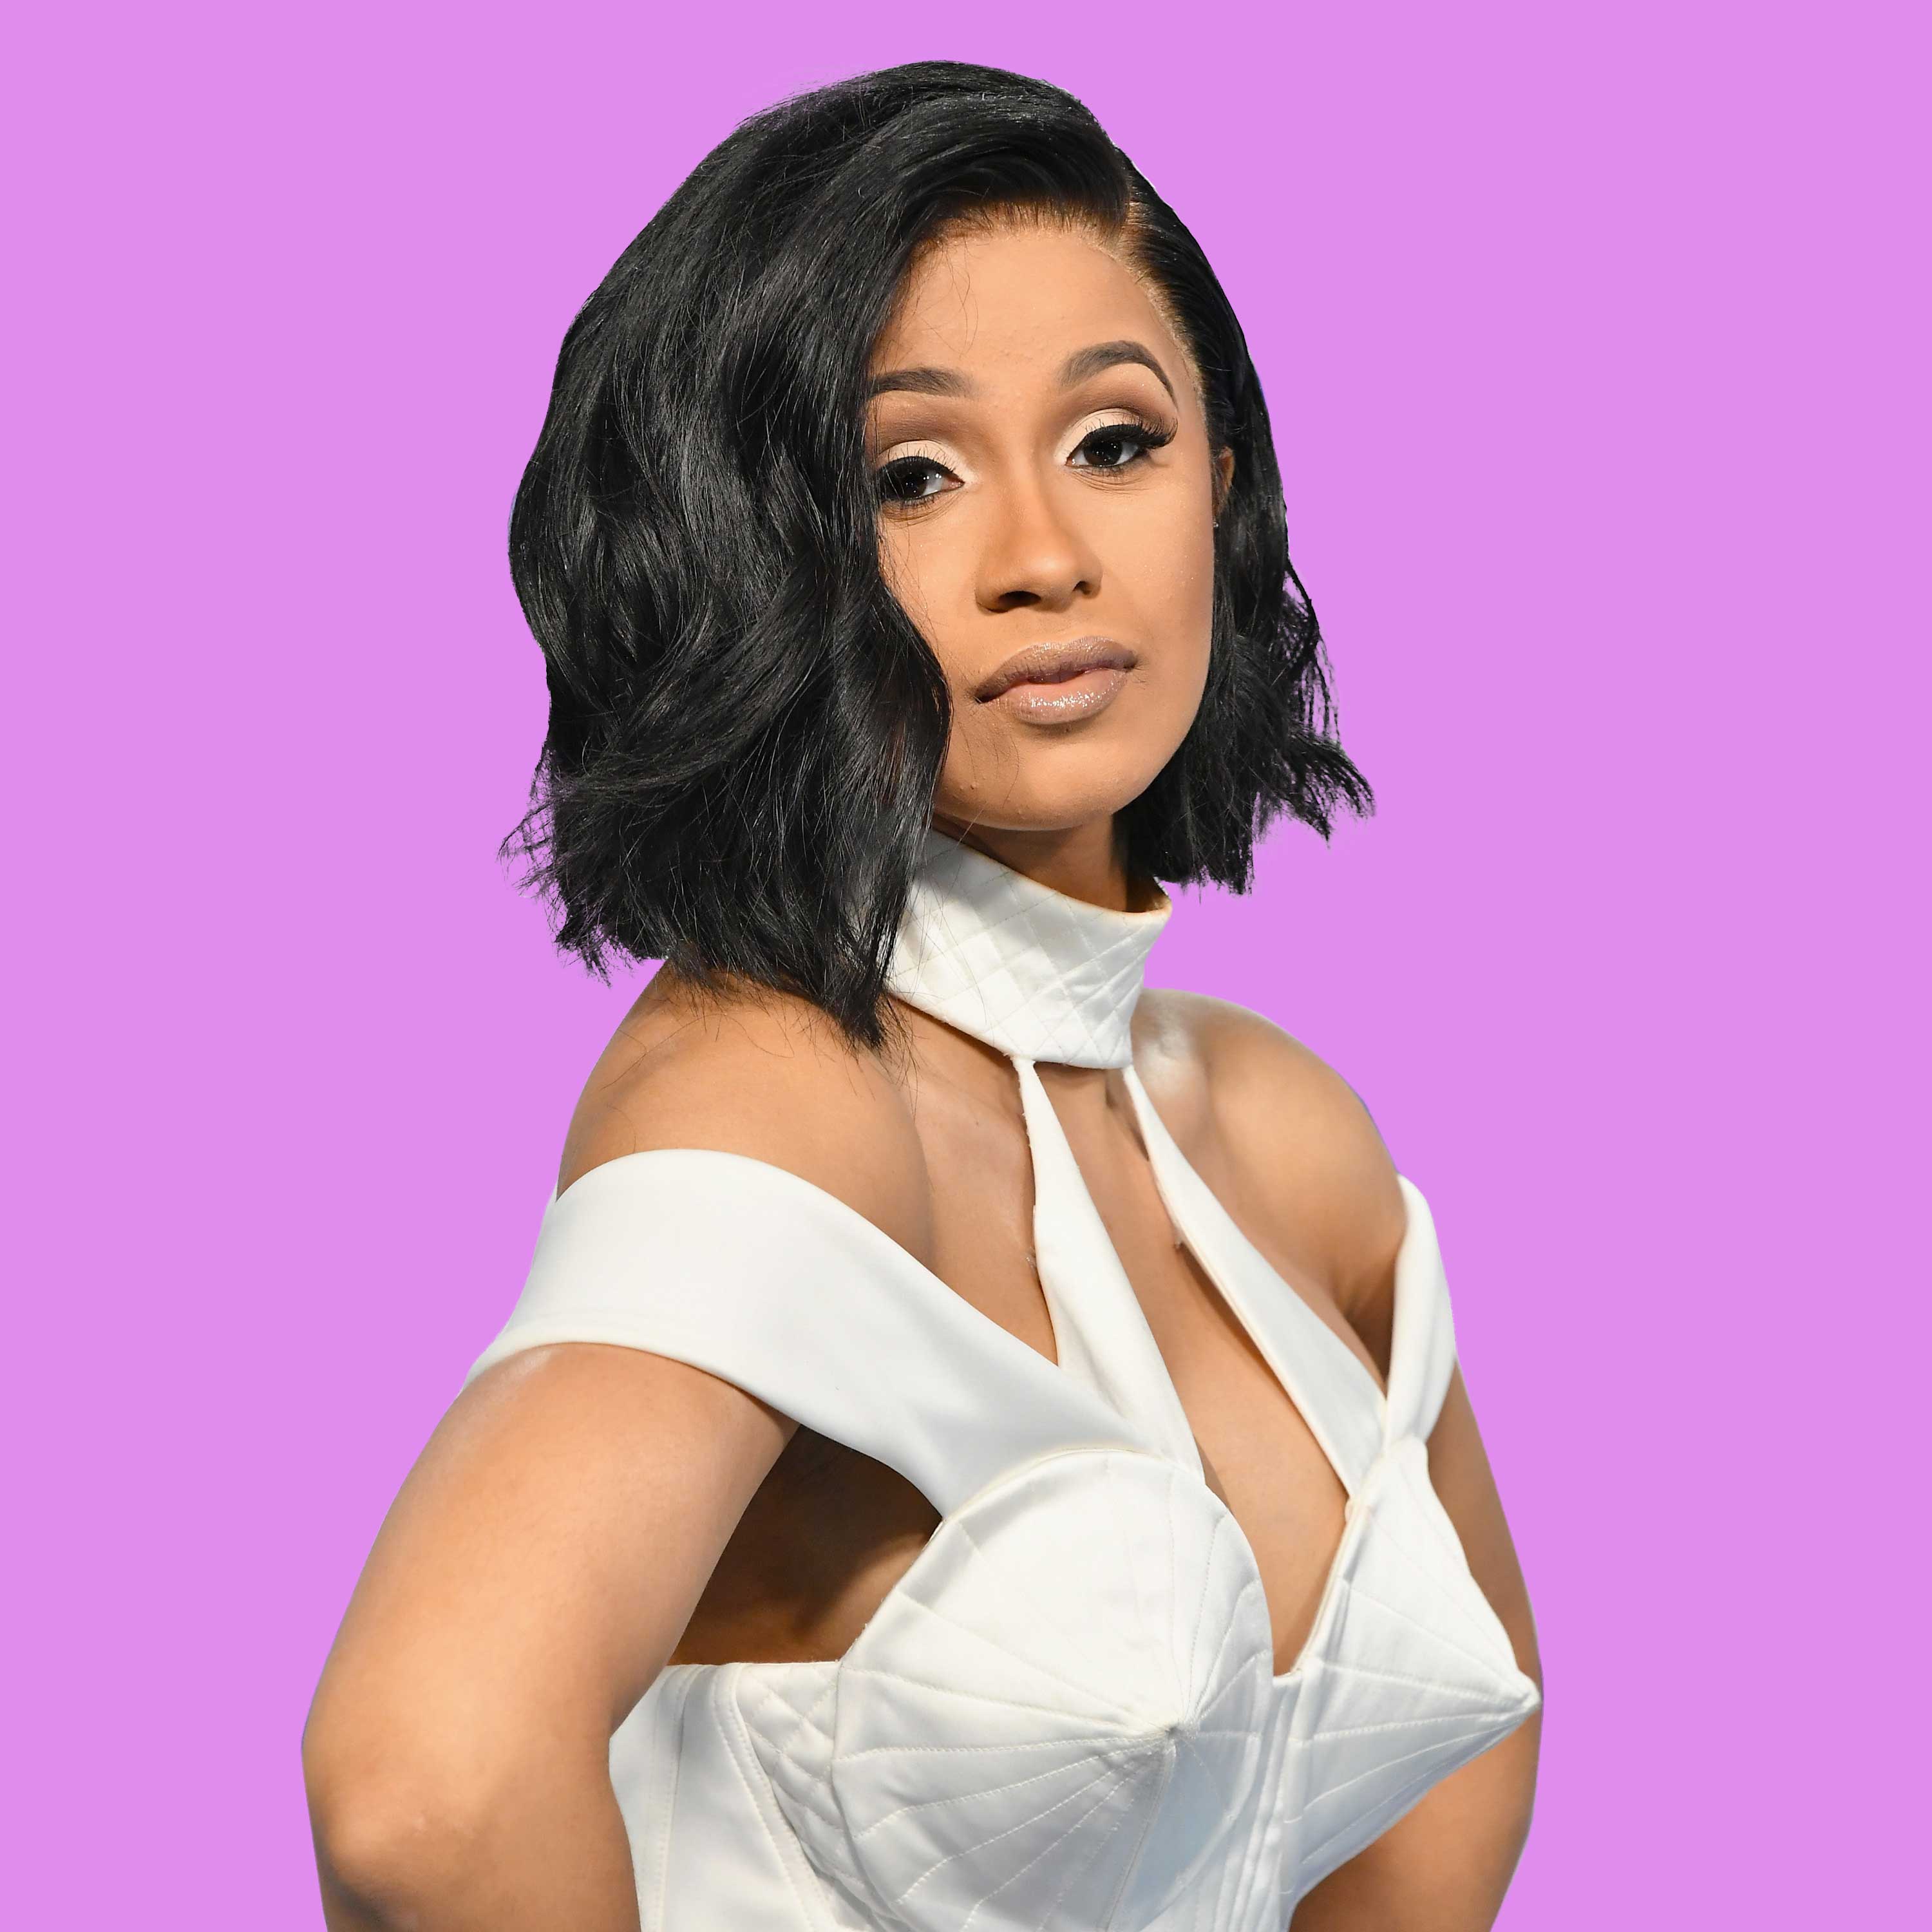 Cardi B Uses An Iron To Straighten Her Hair, Because She Can
